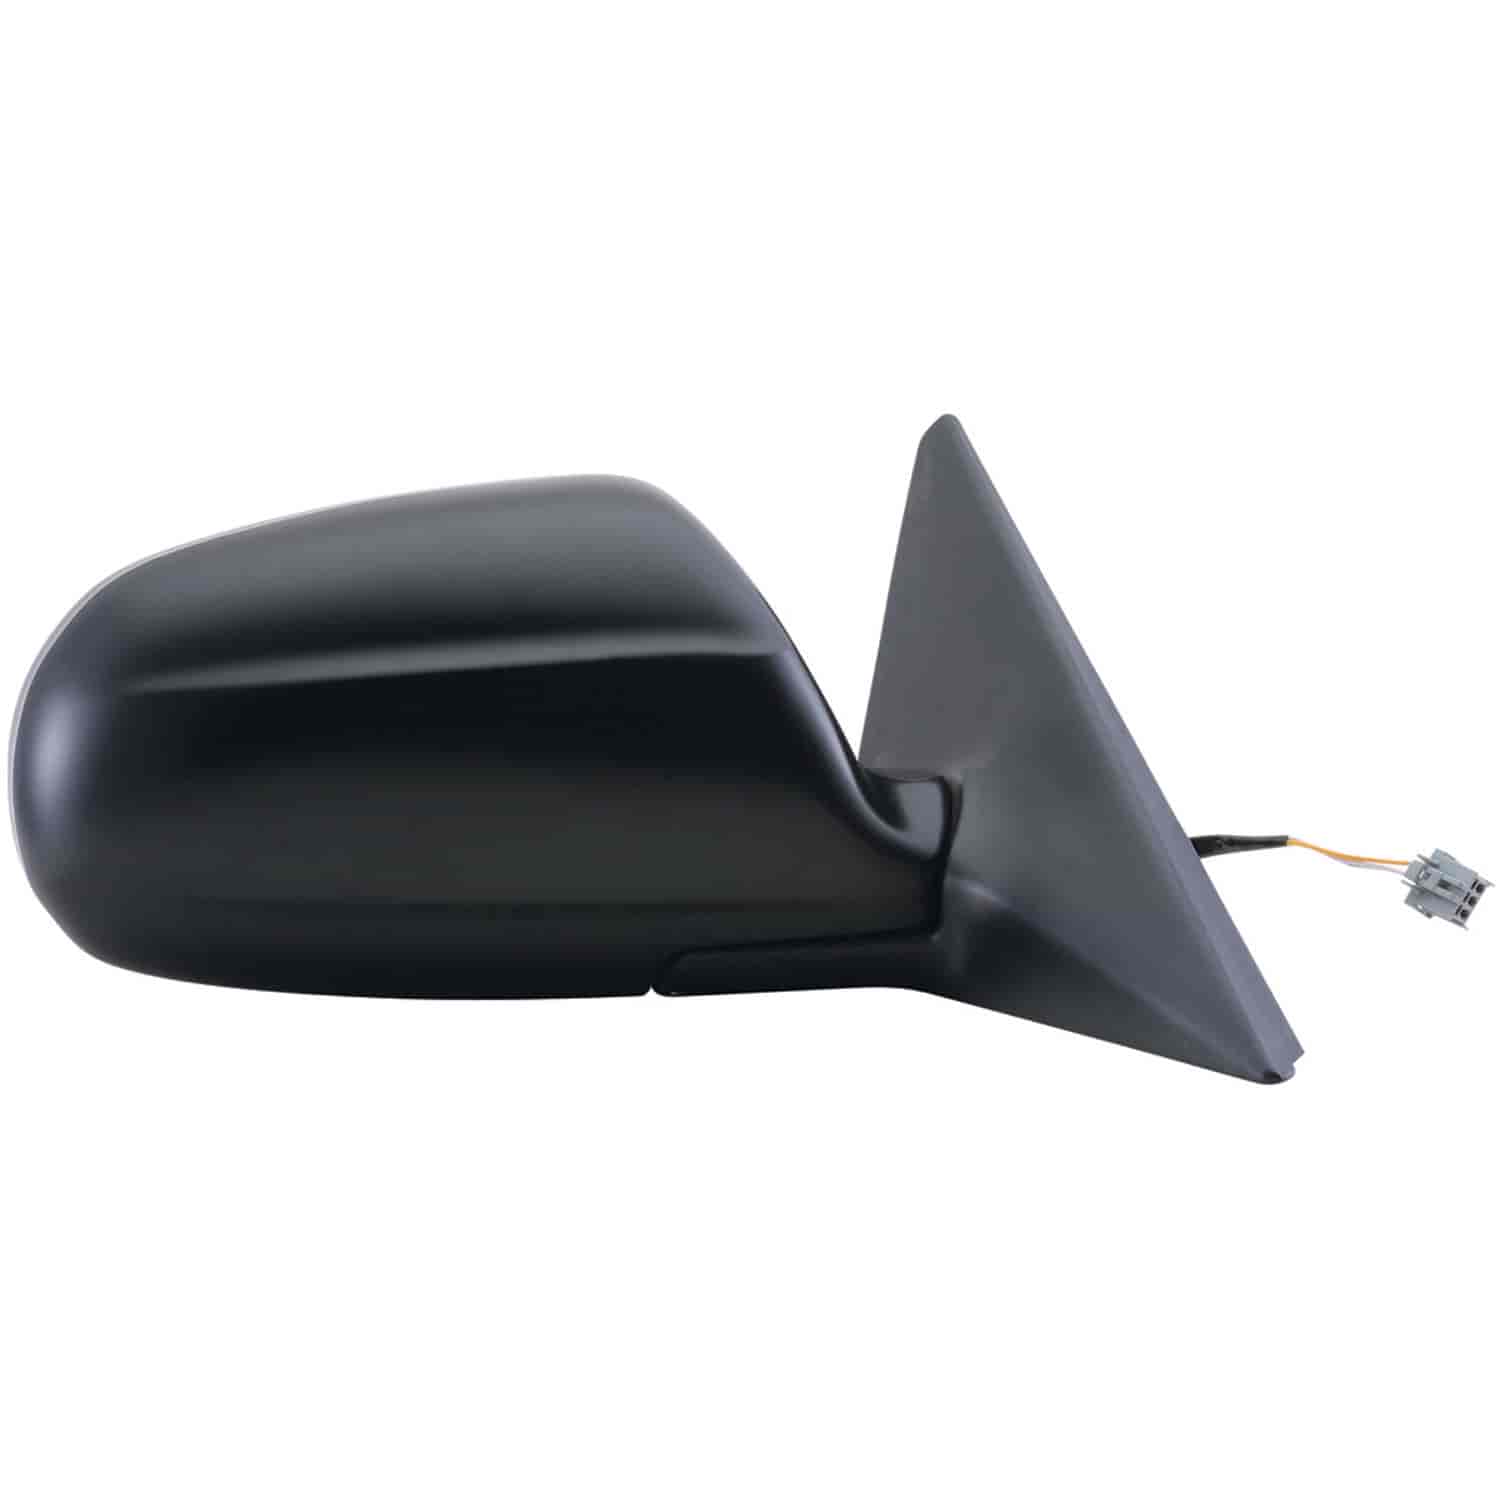 OEM Style Replacement mirror for 97-01 Honda Prelude passenger side mirror tested to fit and functio